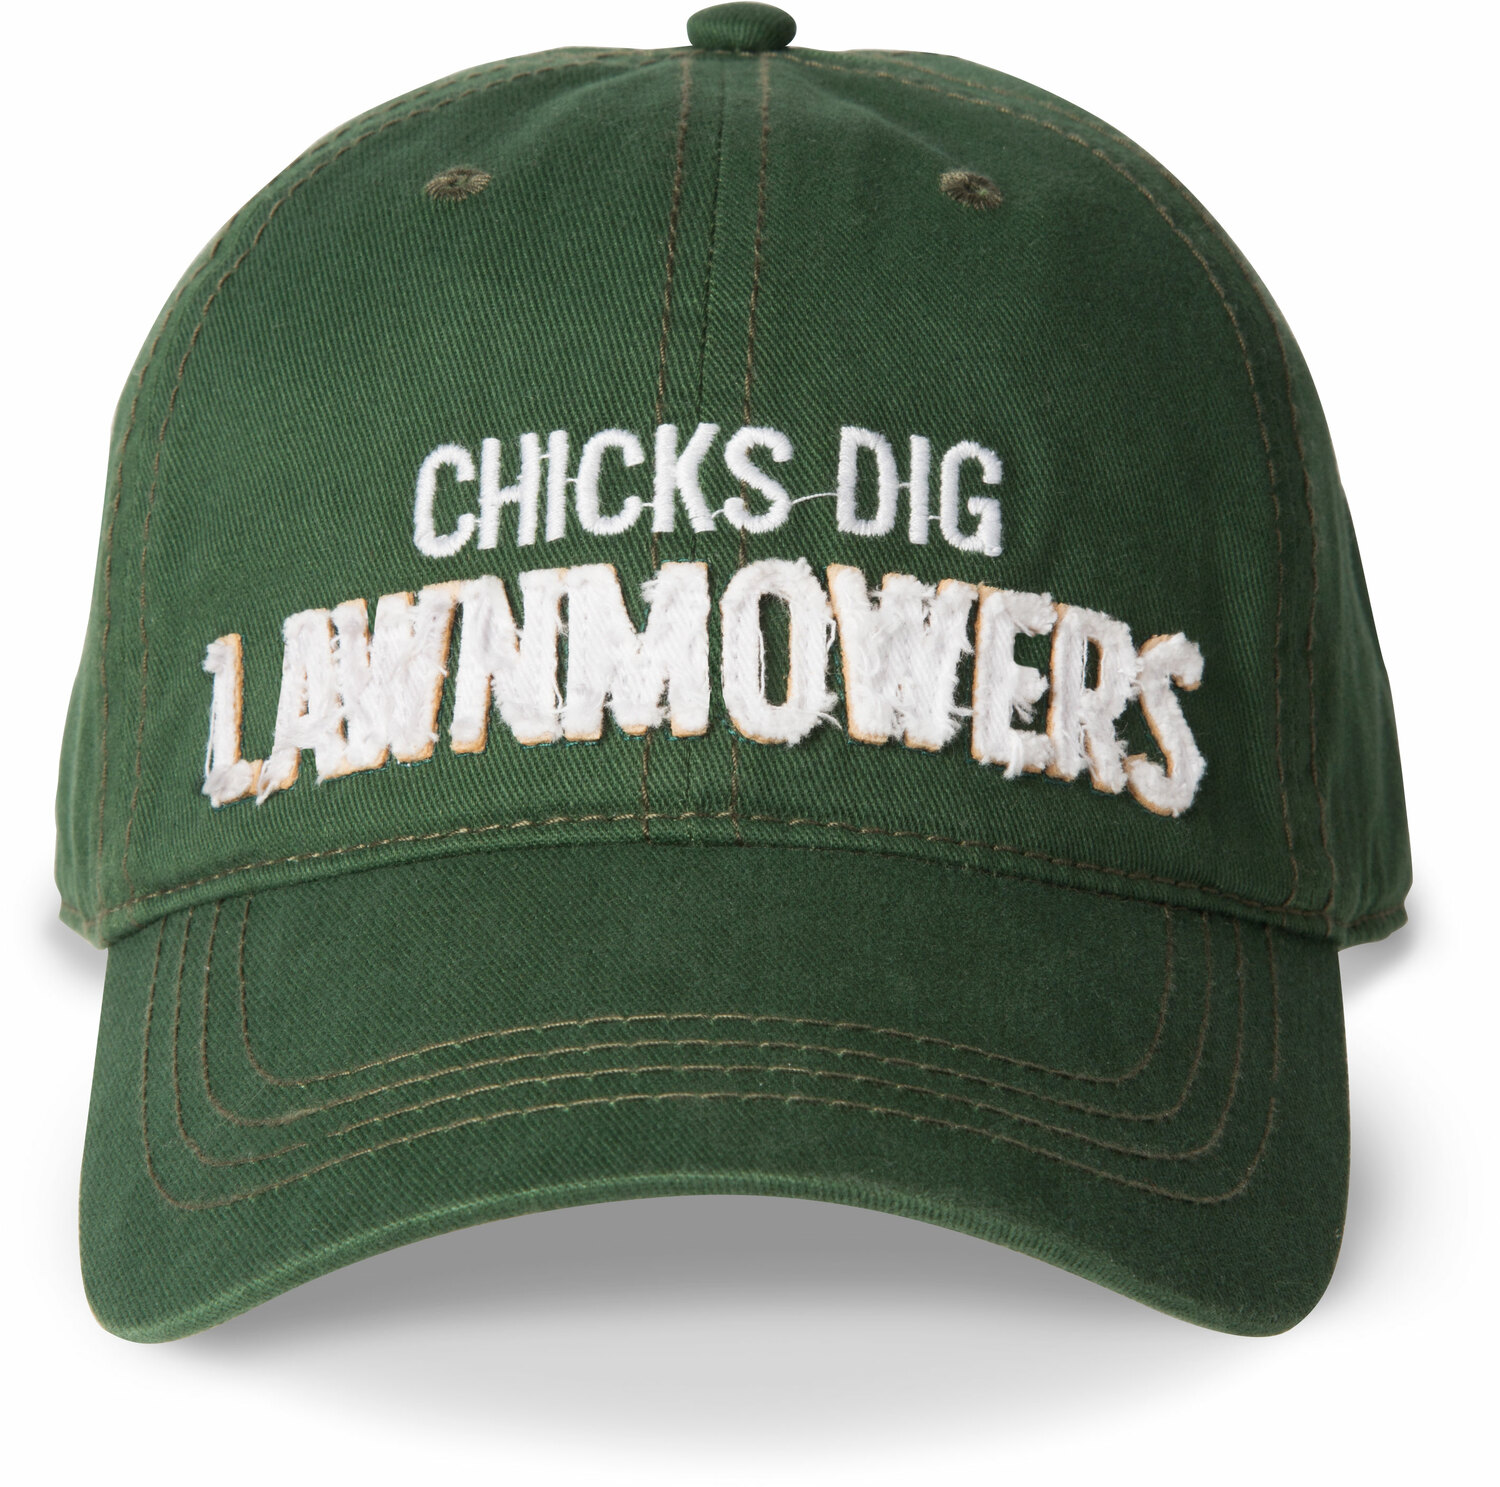 Lawnmowers by Man Made - Lawnmowers - Green Adjustable Hat